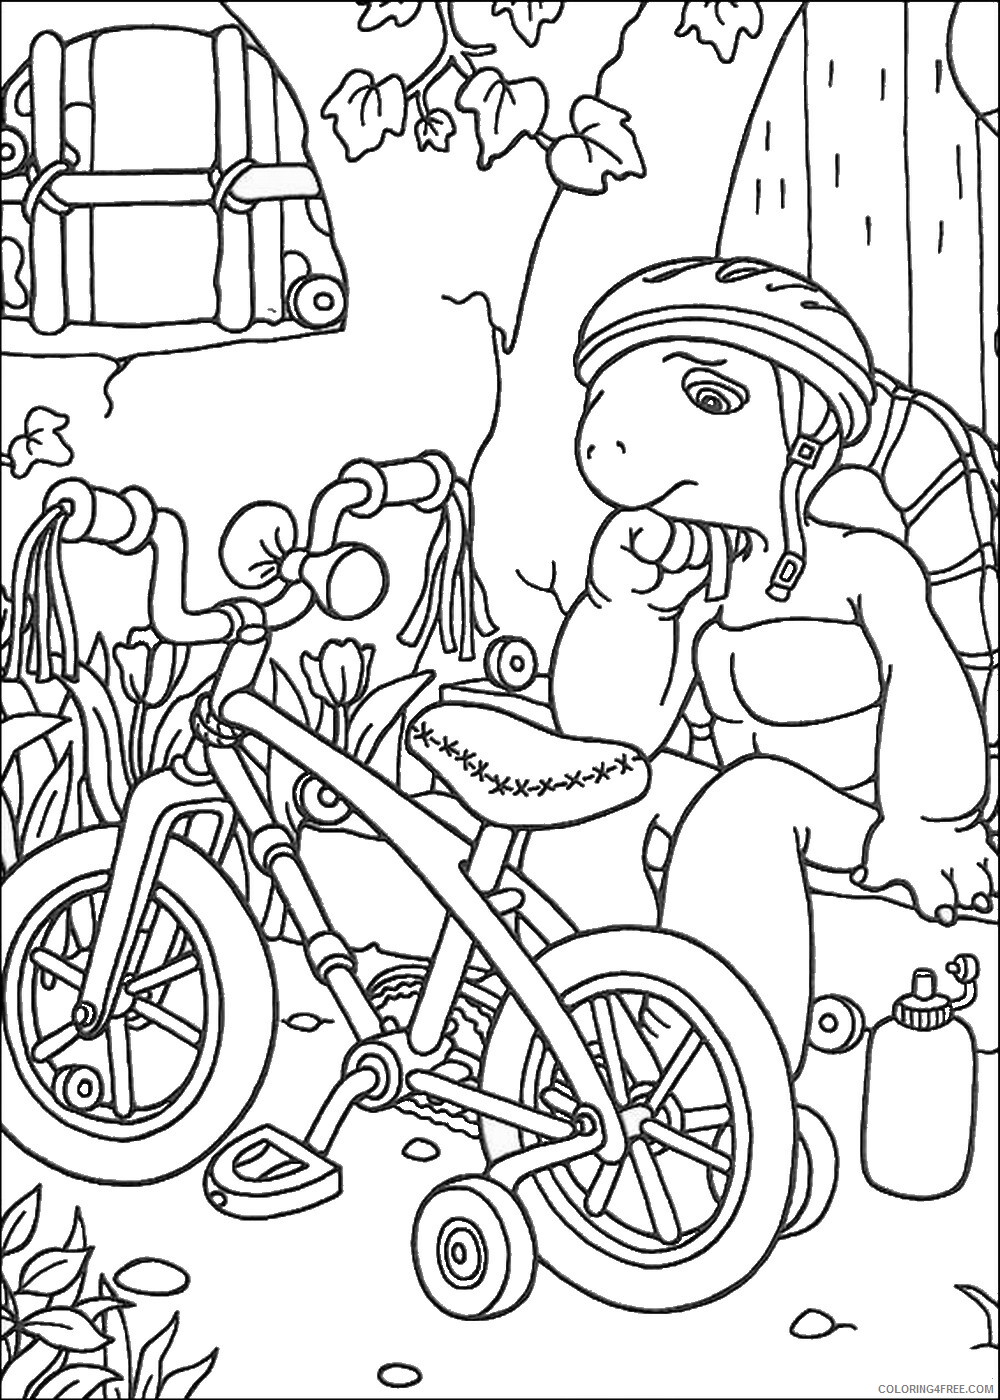 Franklin and Friends Coloring Pages TV Film franklin_cl_20 Printable 2020 03021 Coloring4free